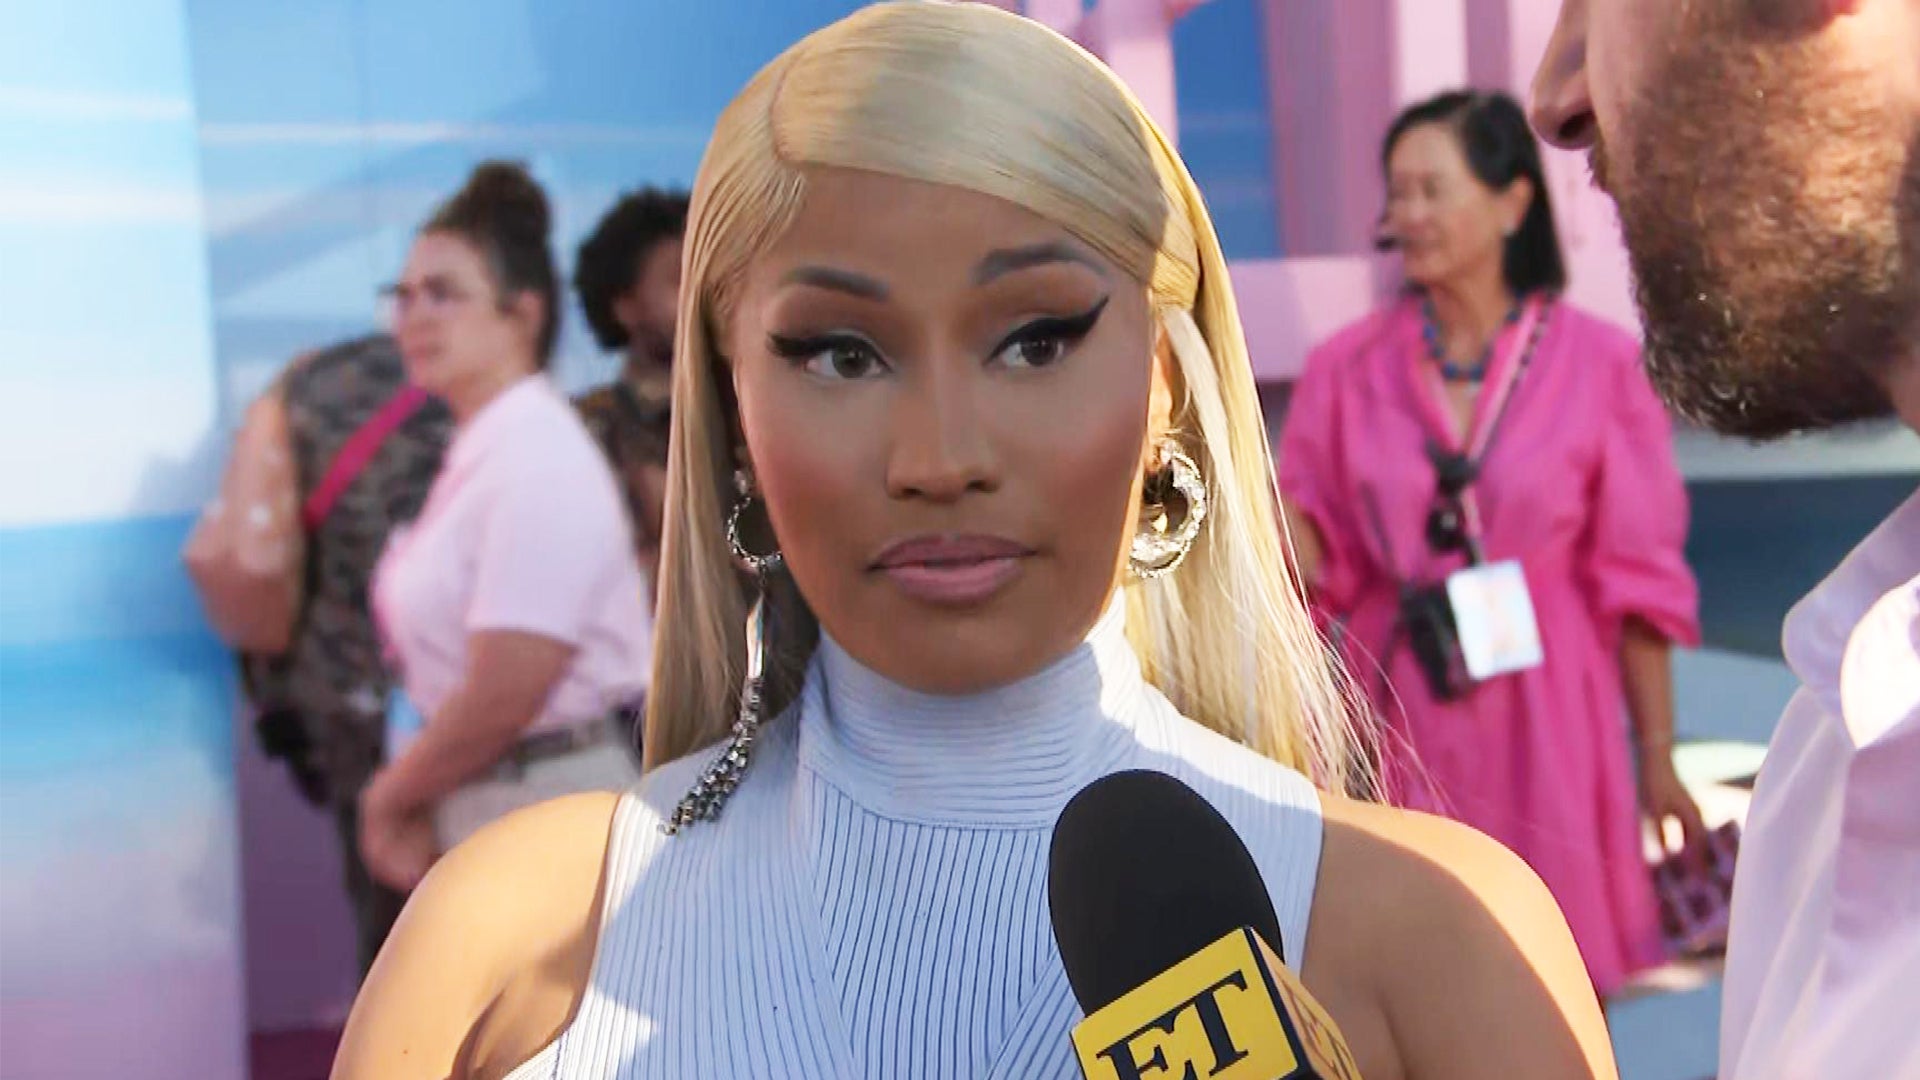 Nicki Minaj's 25 Best Style Moments of All Time